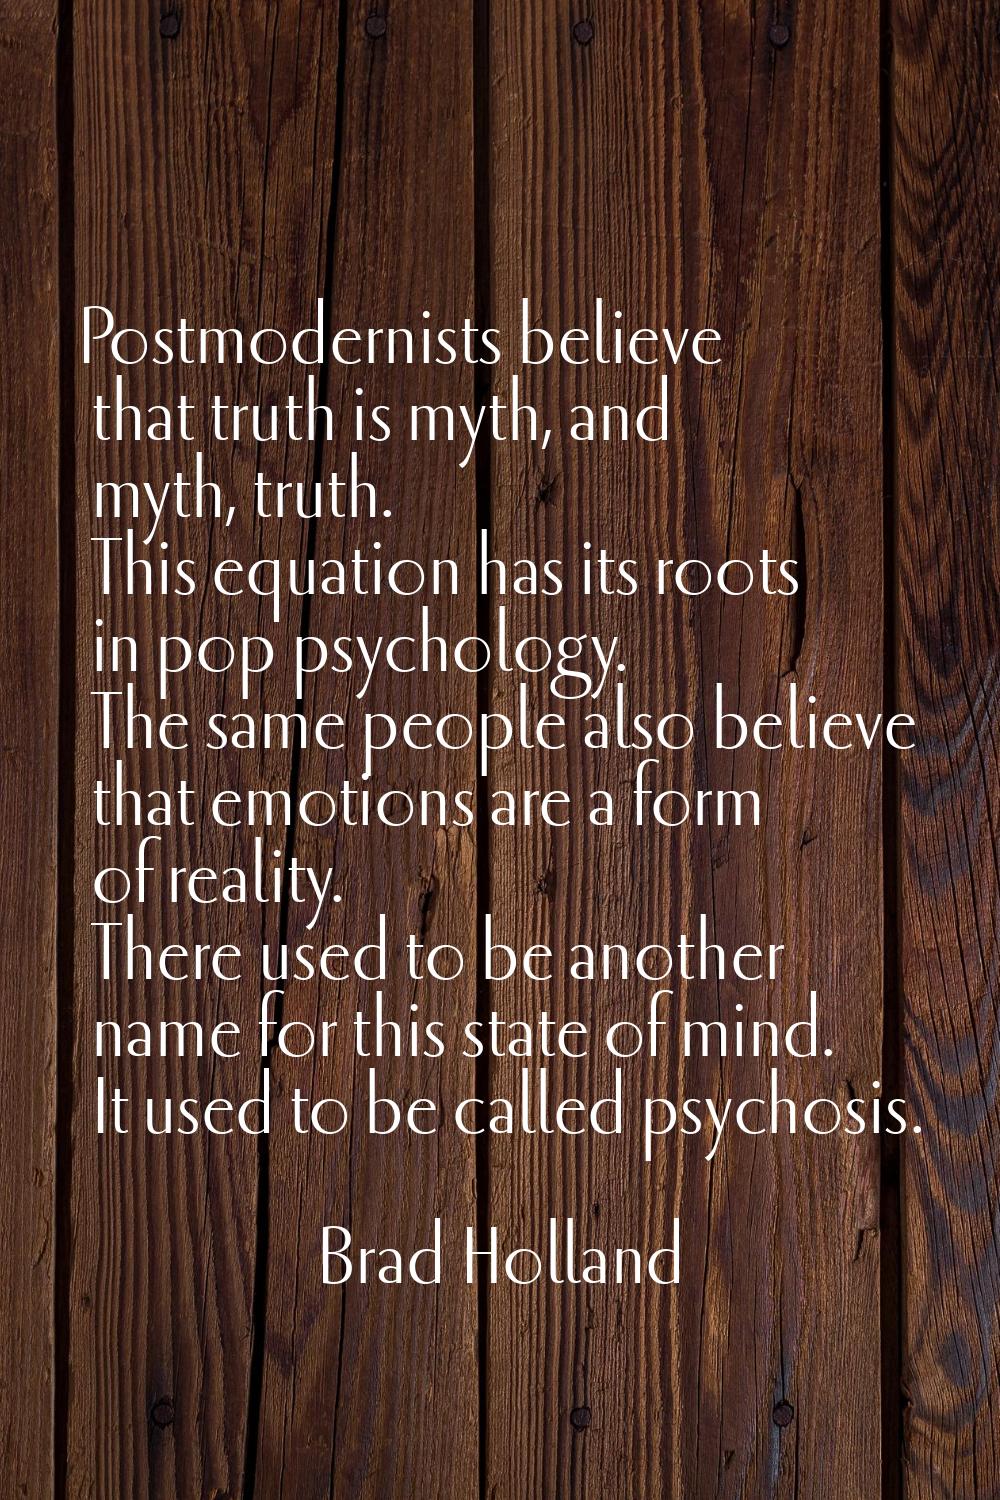 Postmodernists believe that truth is myth, and myth, truth. This equation has its roots in pop psyc